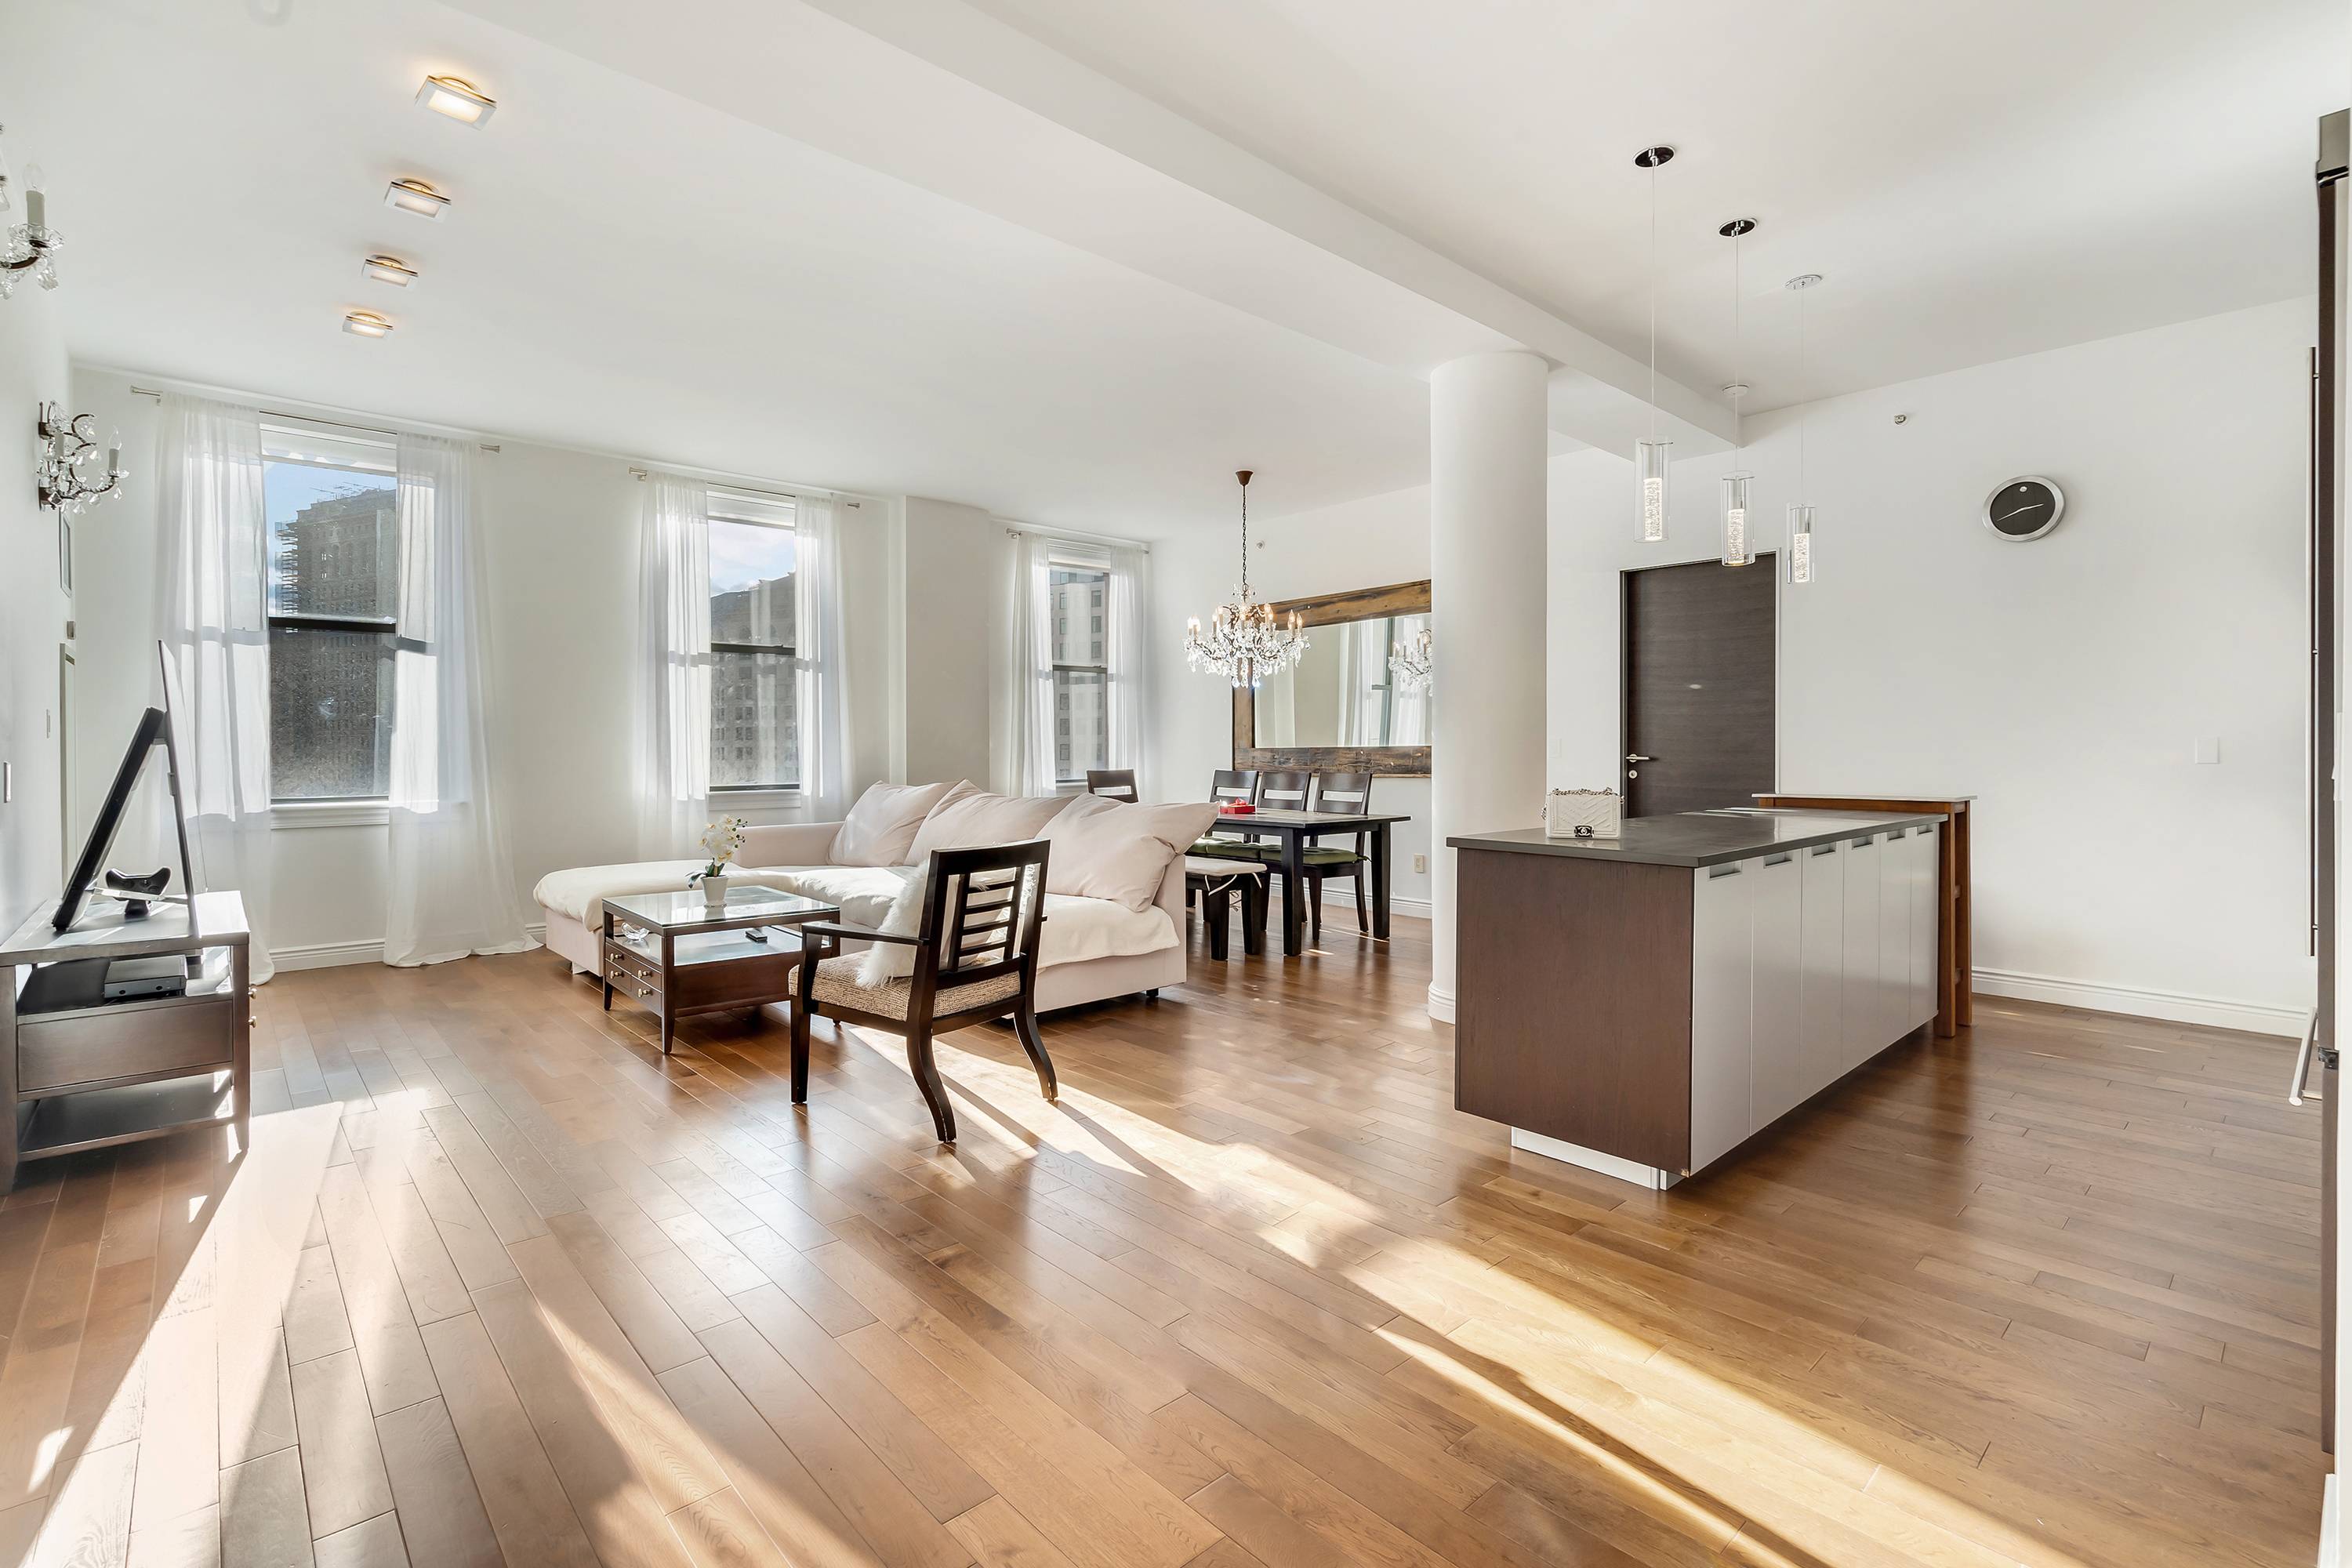 Unobstructed Madison Park views greet you in this sun splashed loft like apartment at The Grand Madison.